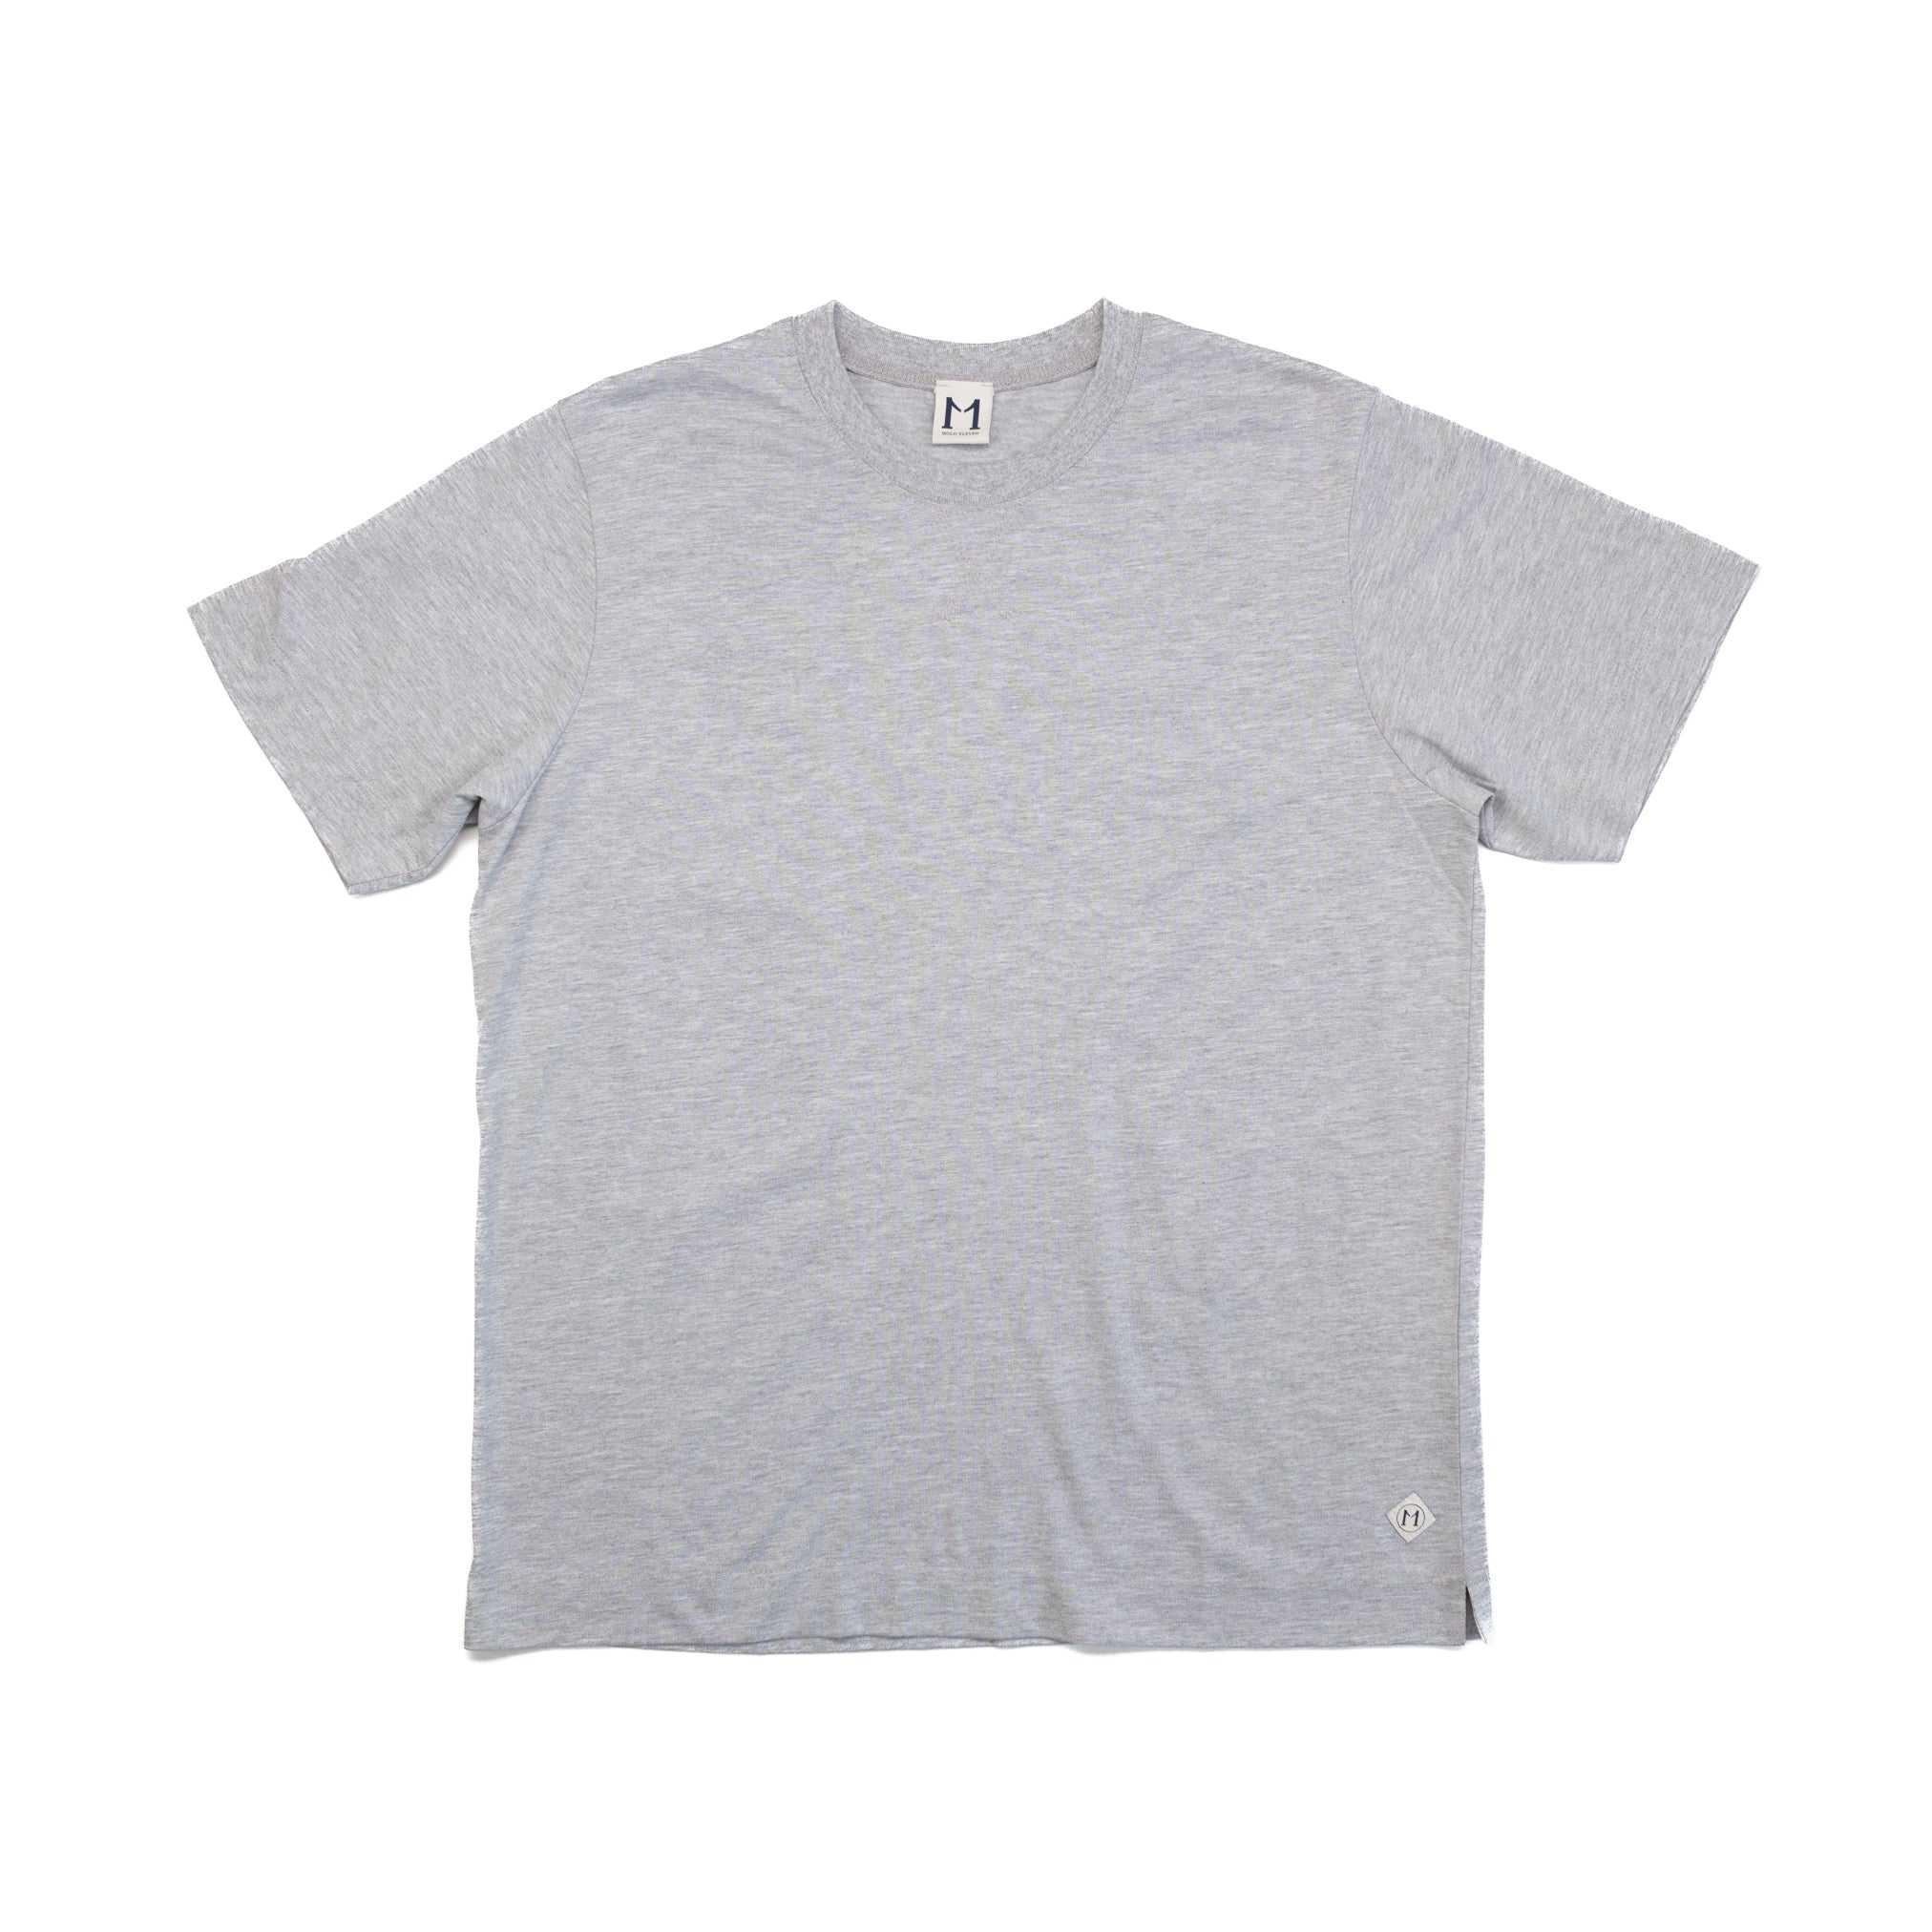 The Grant T-Shirt in Grey